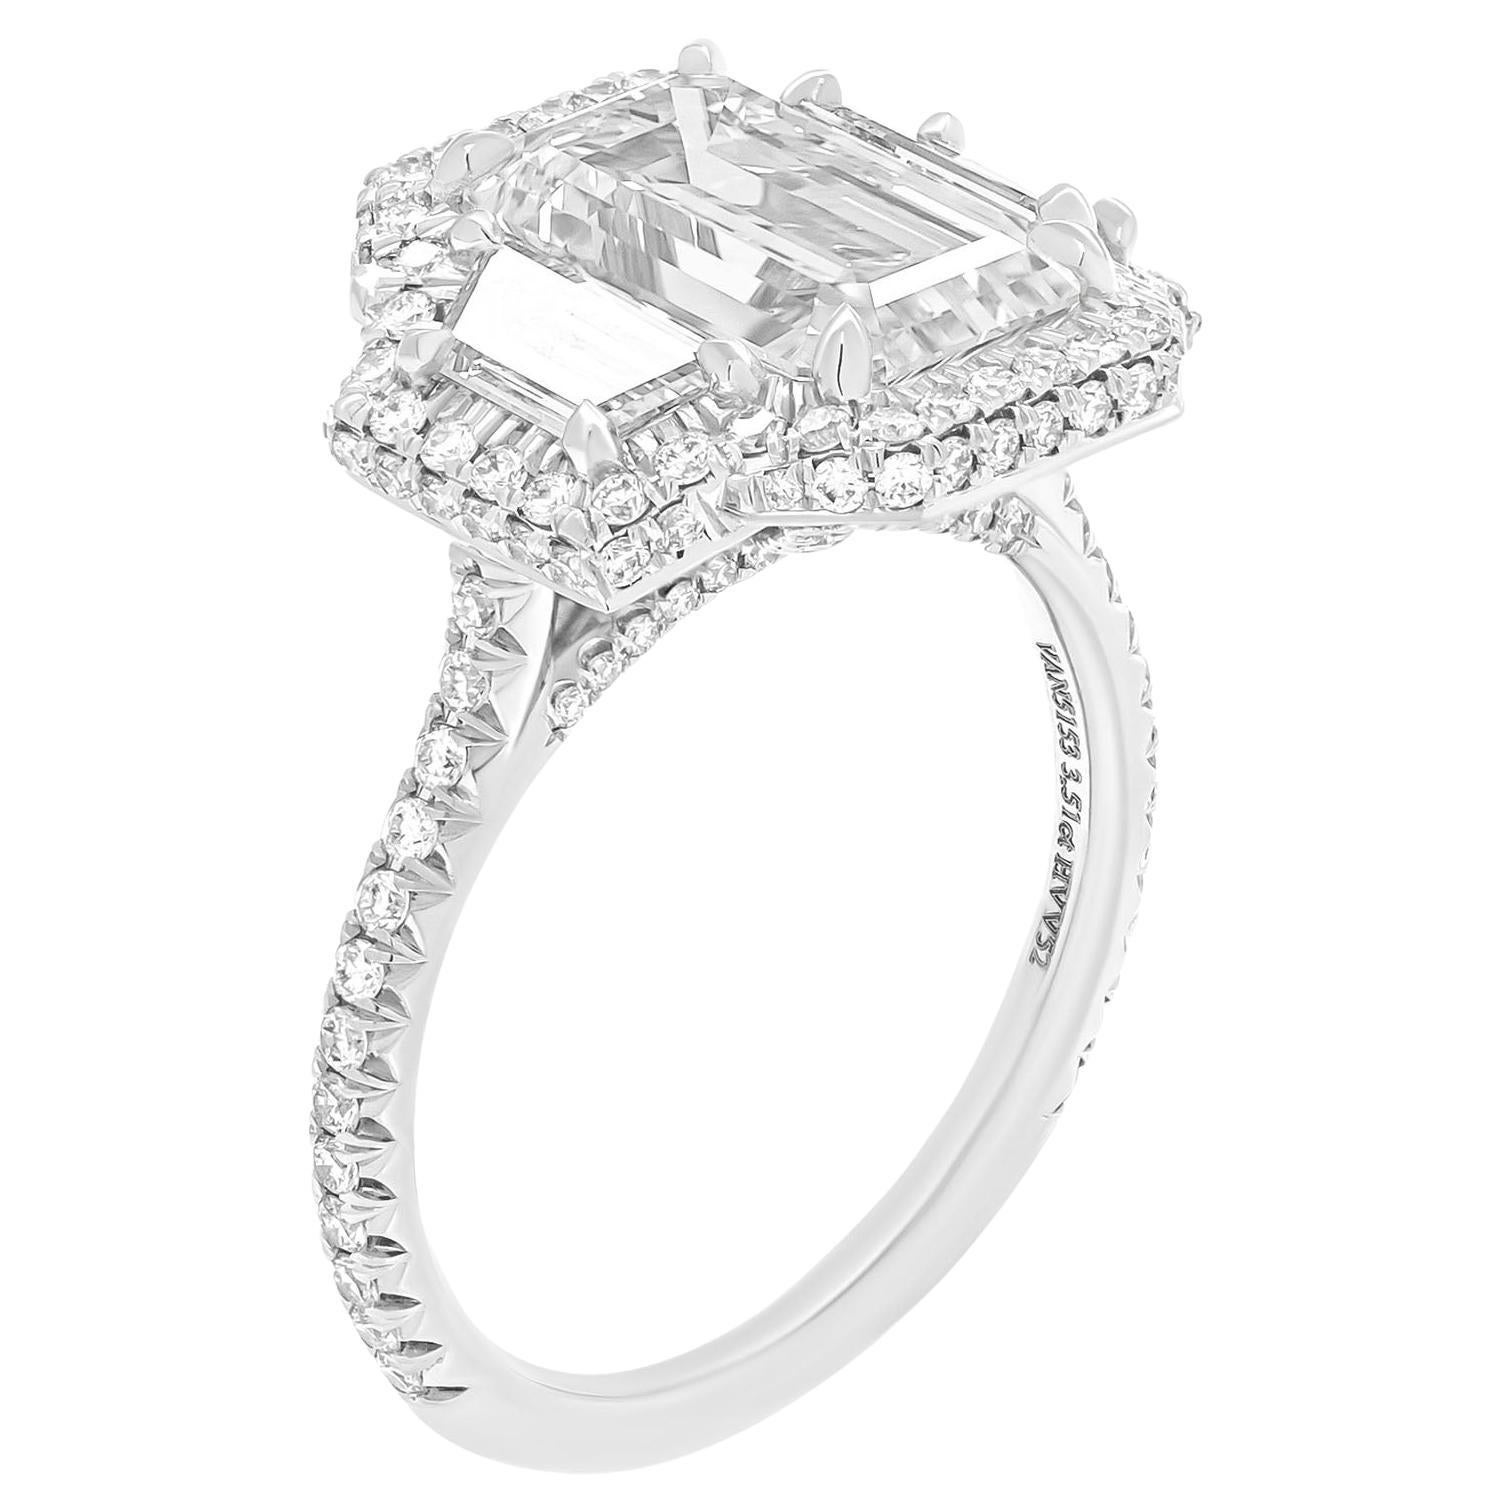 GIA Certified 3-Stone Ring with 3.51ct H VVS2 Emerald Cut